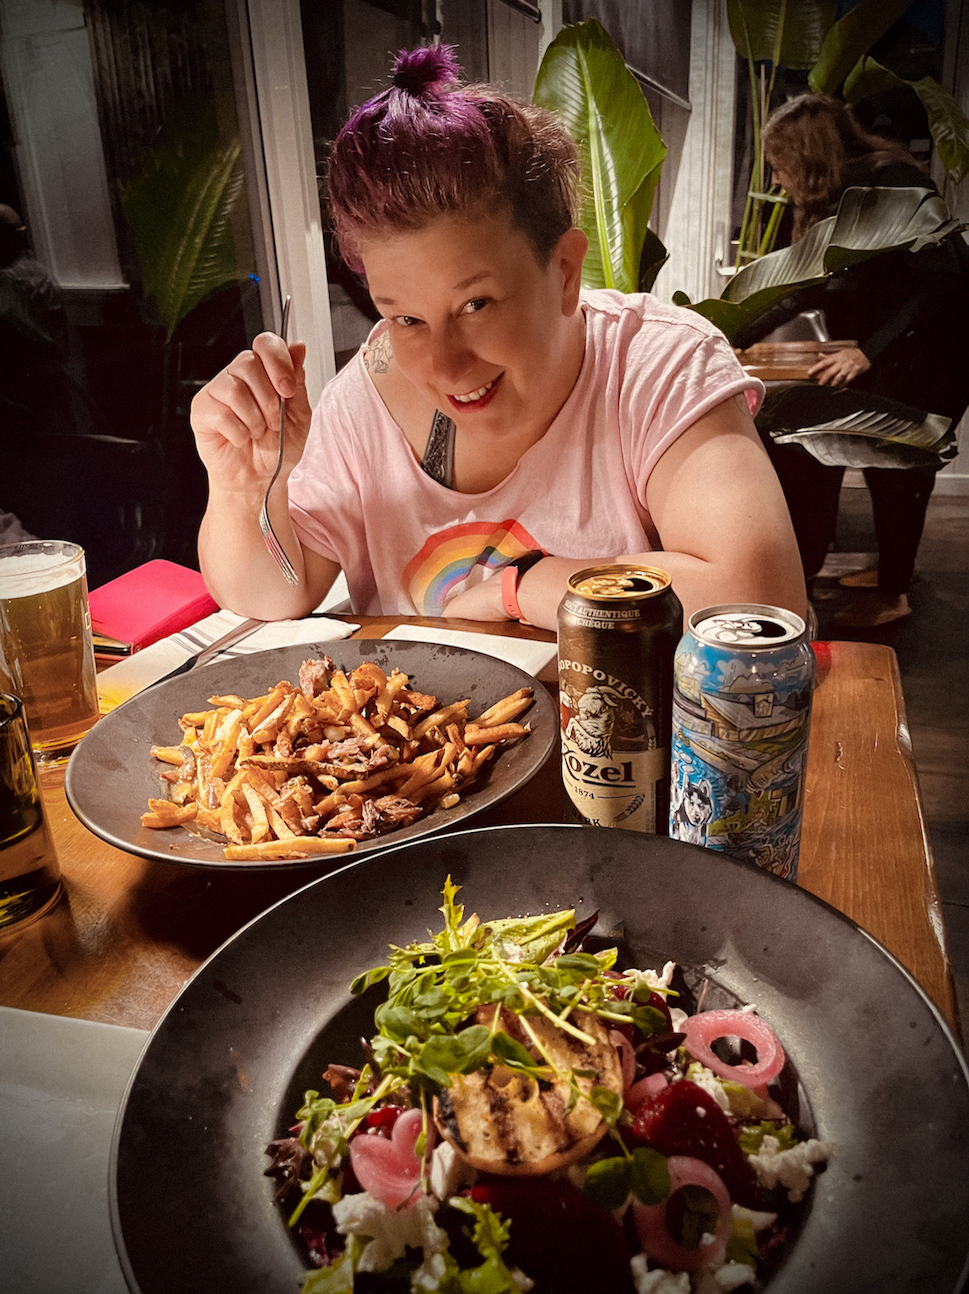 a smiling person with a pink shirt and purple hair sitting at a restaurant table, holding a fork over a giant plate of poutine and a salad